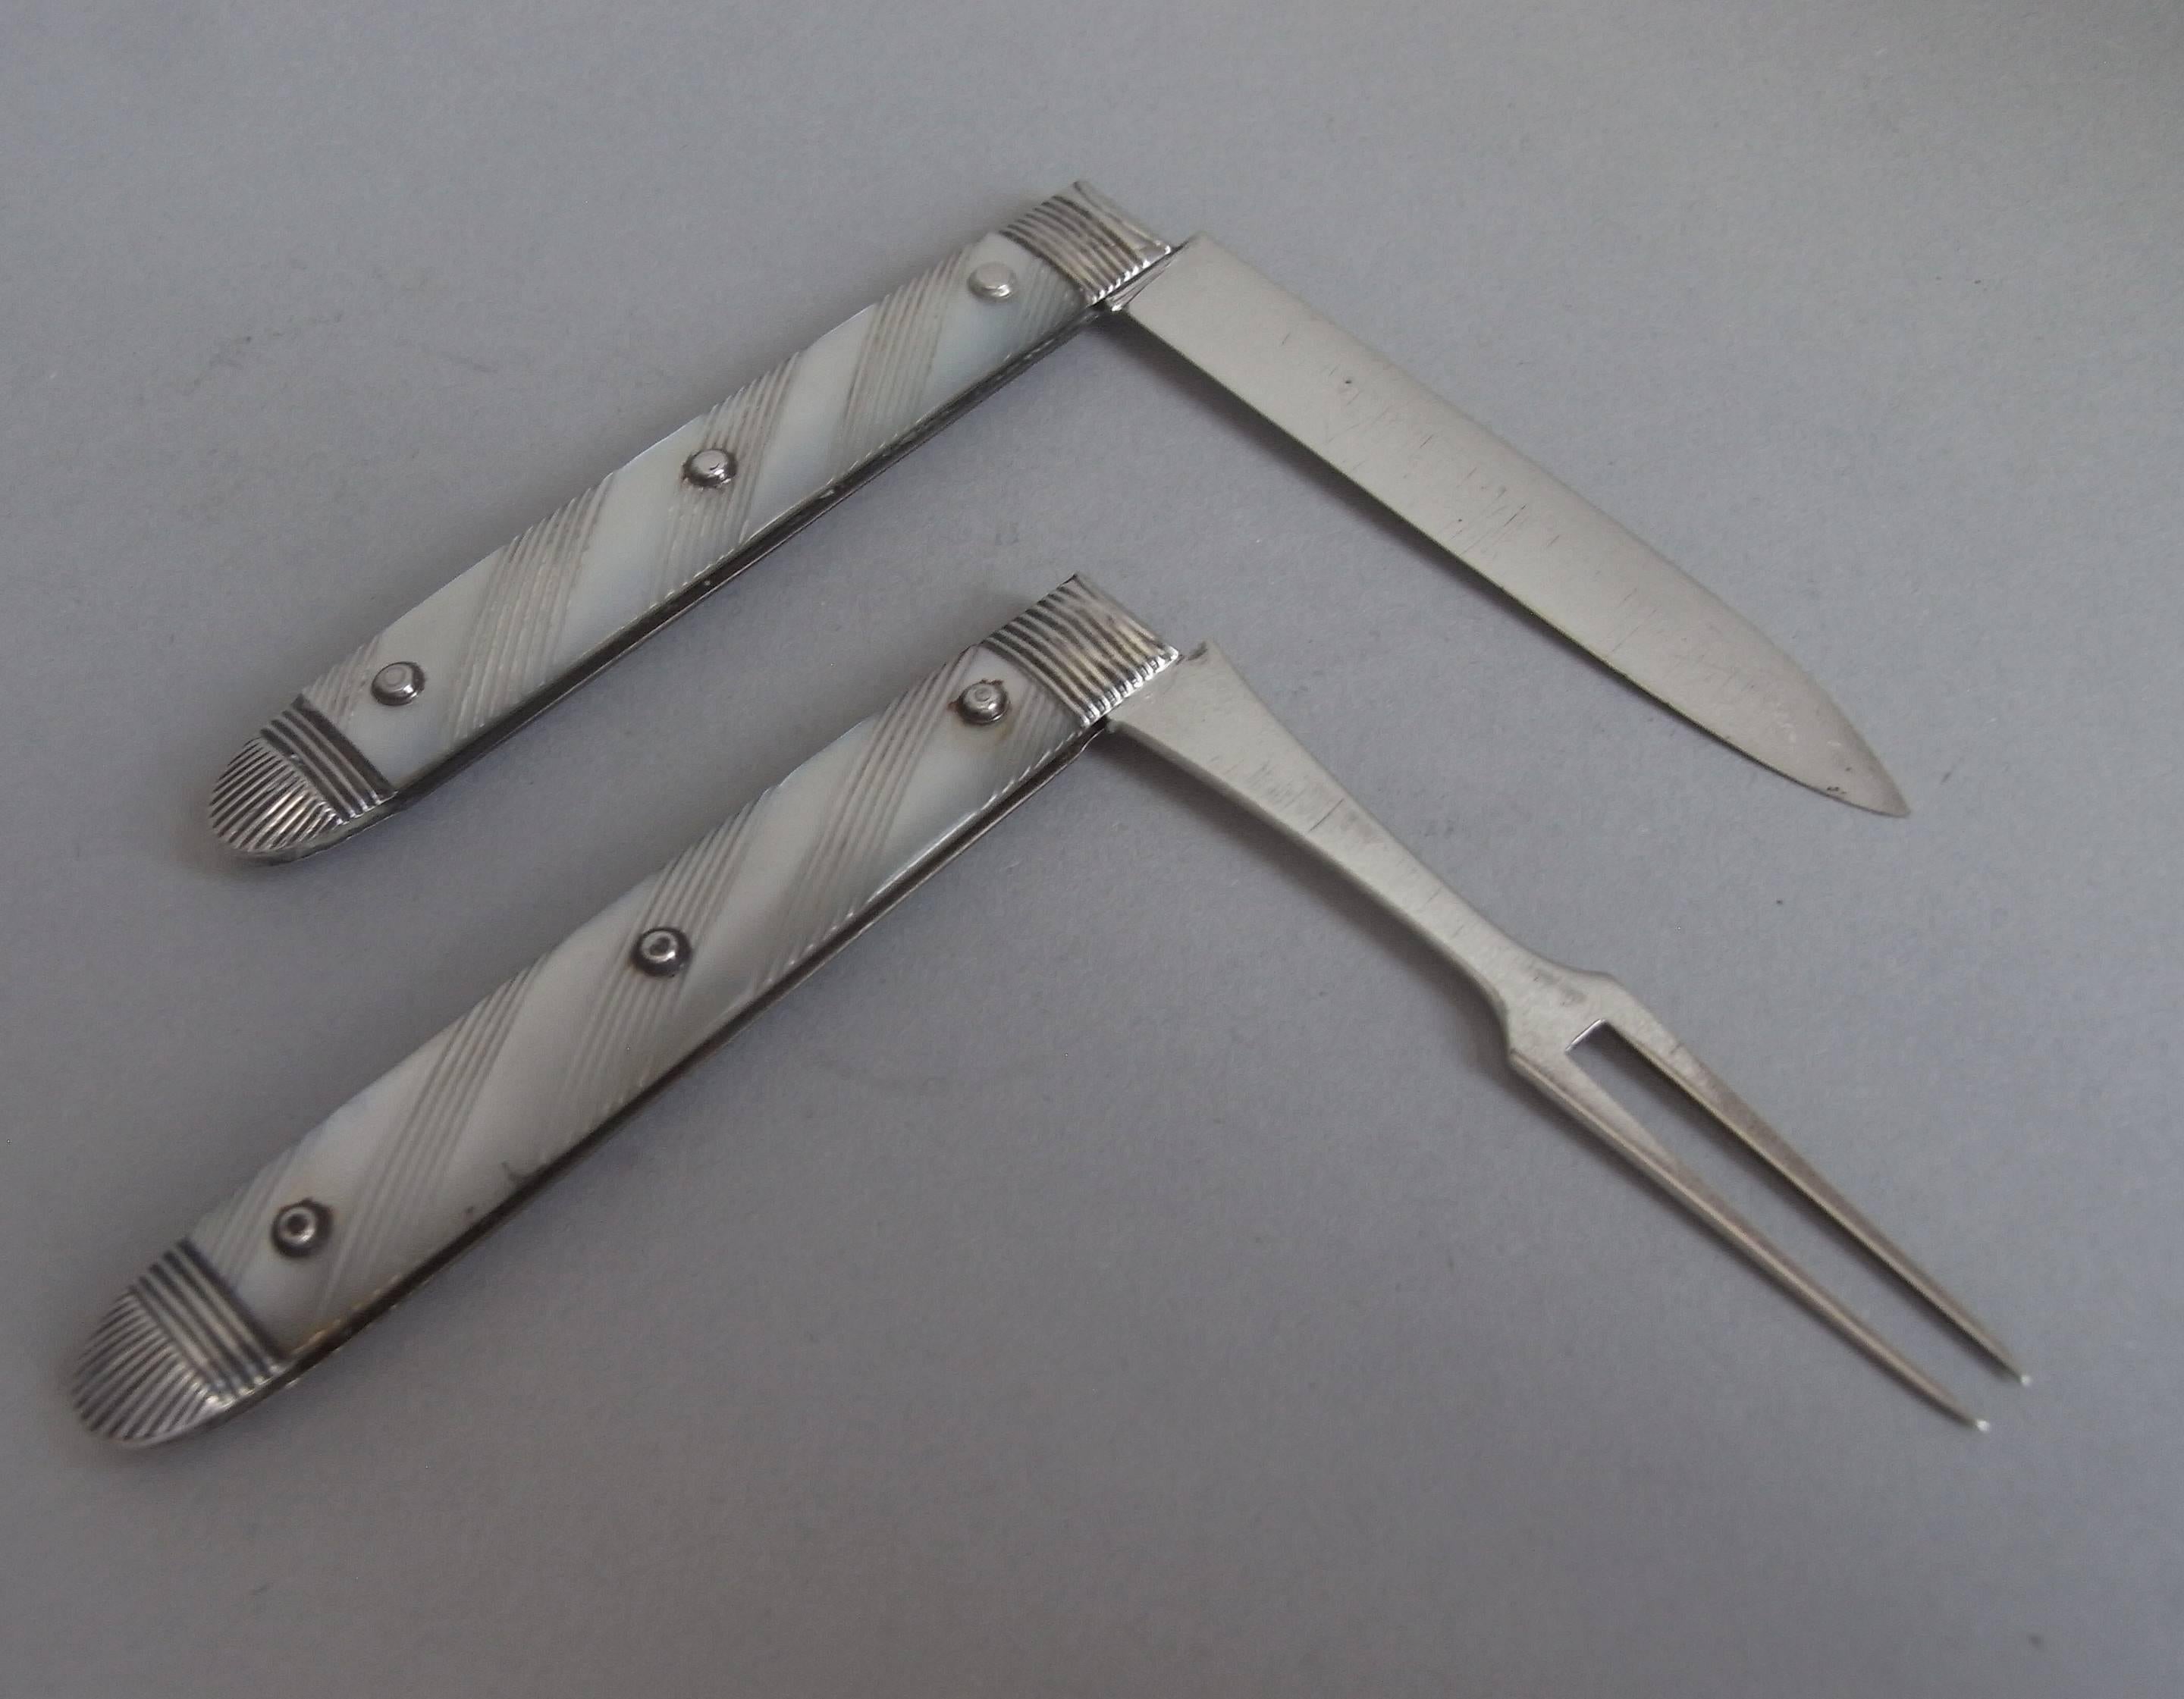 The fruit knife and fork have a silver blade and tines and reeded mounts. The mother-of-pearl handles are engraved with linear decoration and display silver stud work. Both are in excellent condition and are very well marked. They are contained